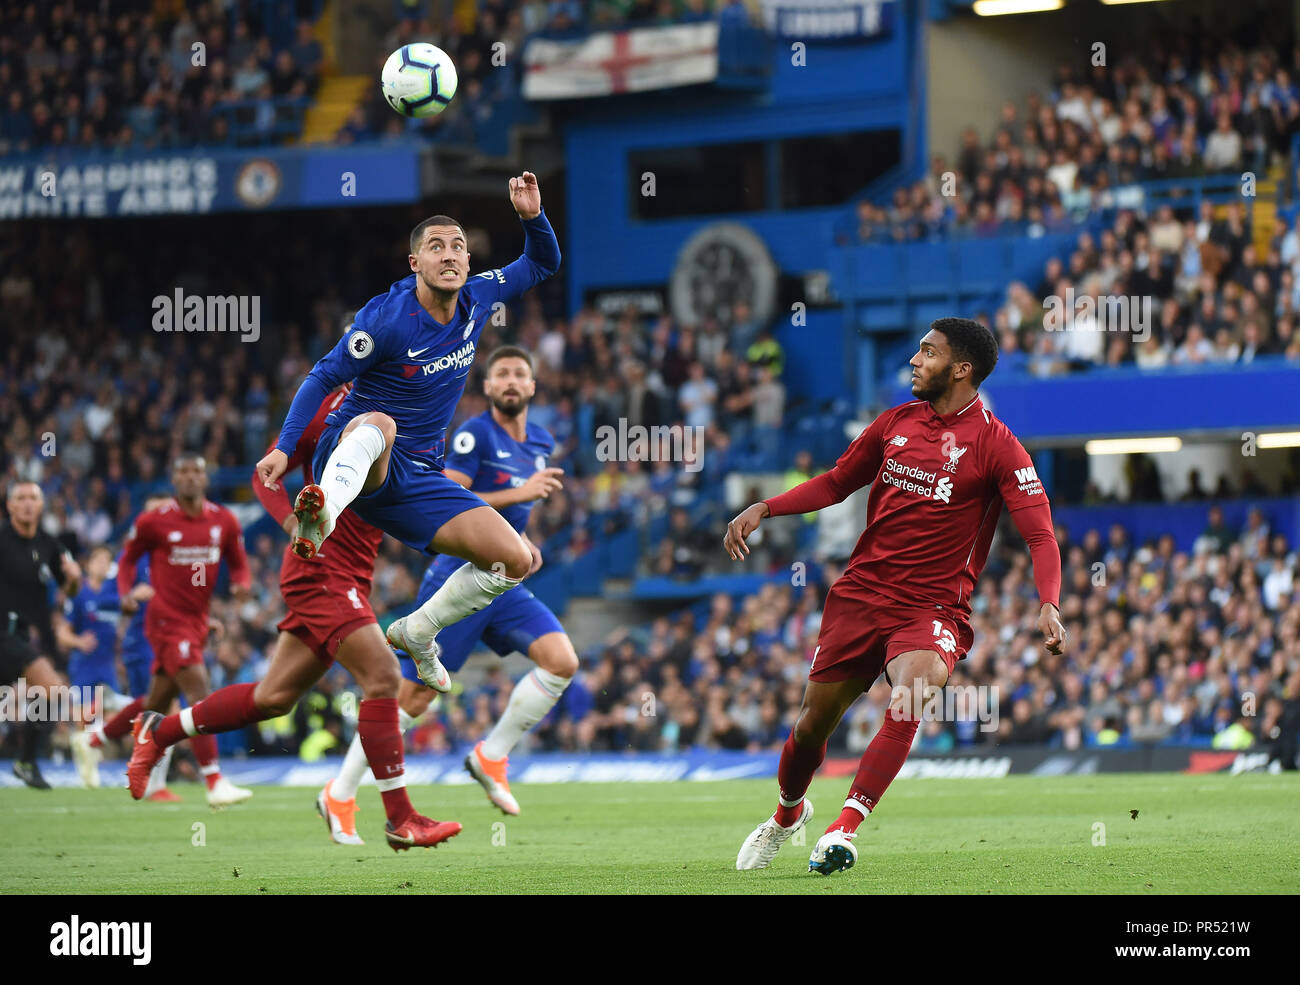 London, UK. 29th Sept 2018, Eden Hazard of Chelsea during the Premier  League match between Chelsea and Liverpool at Stamford Bridge on September  29th 2018 in London, England. Editorial use only, license